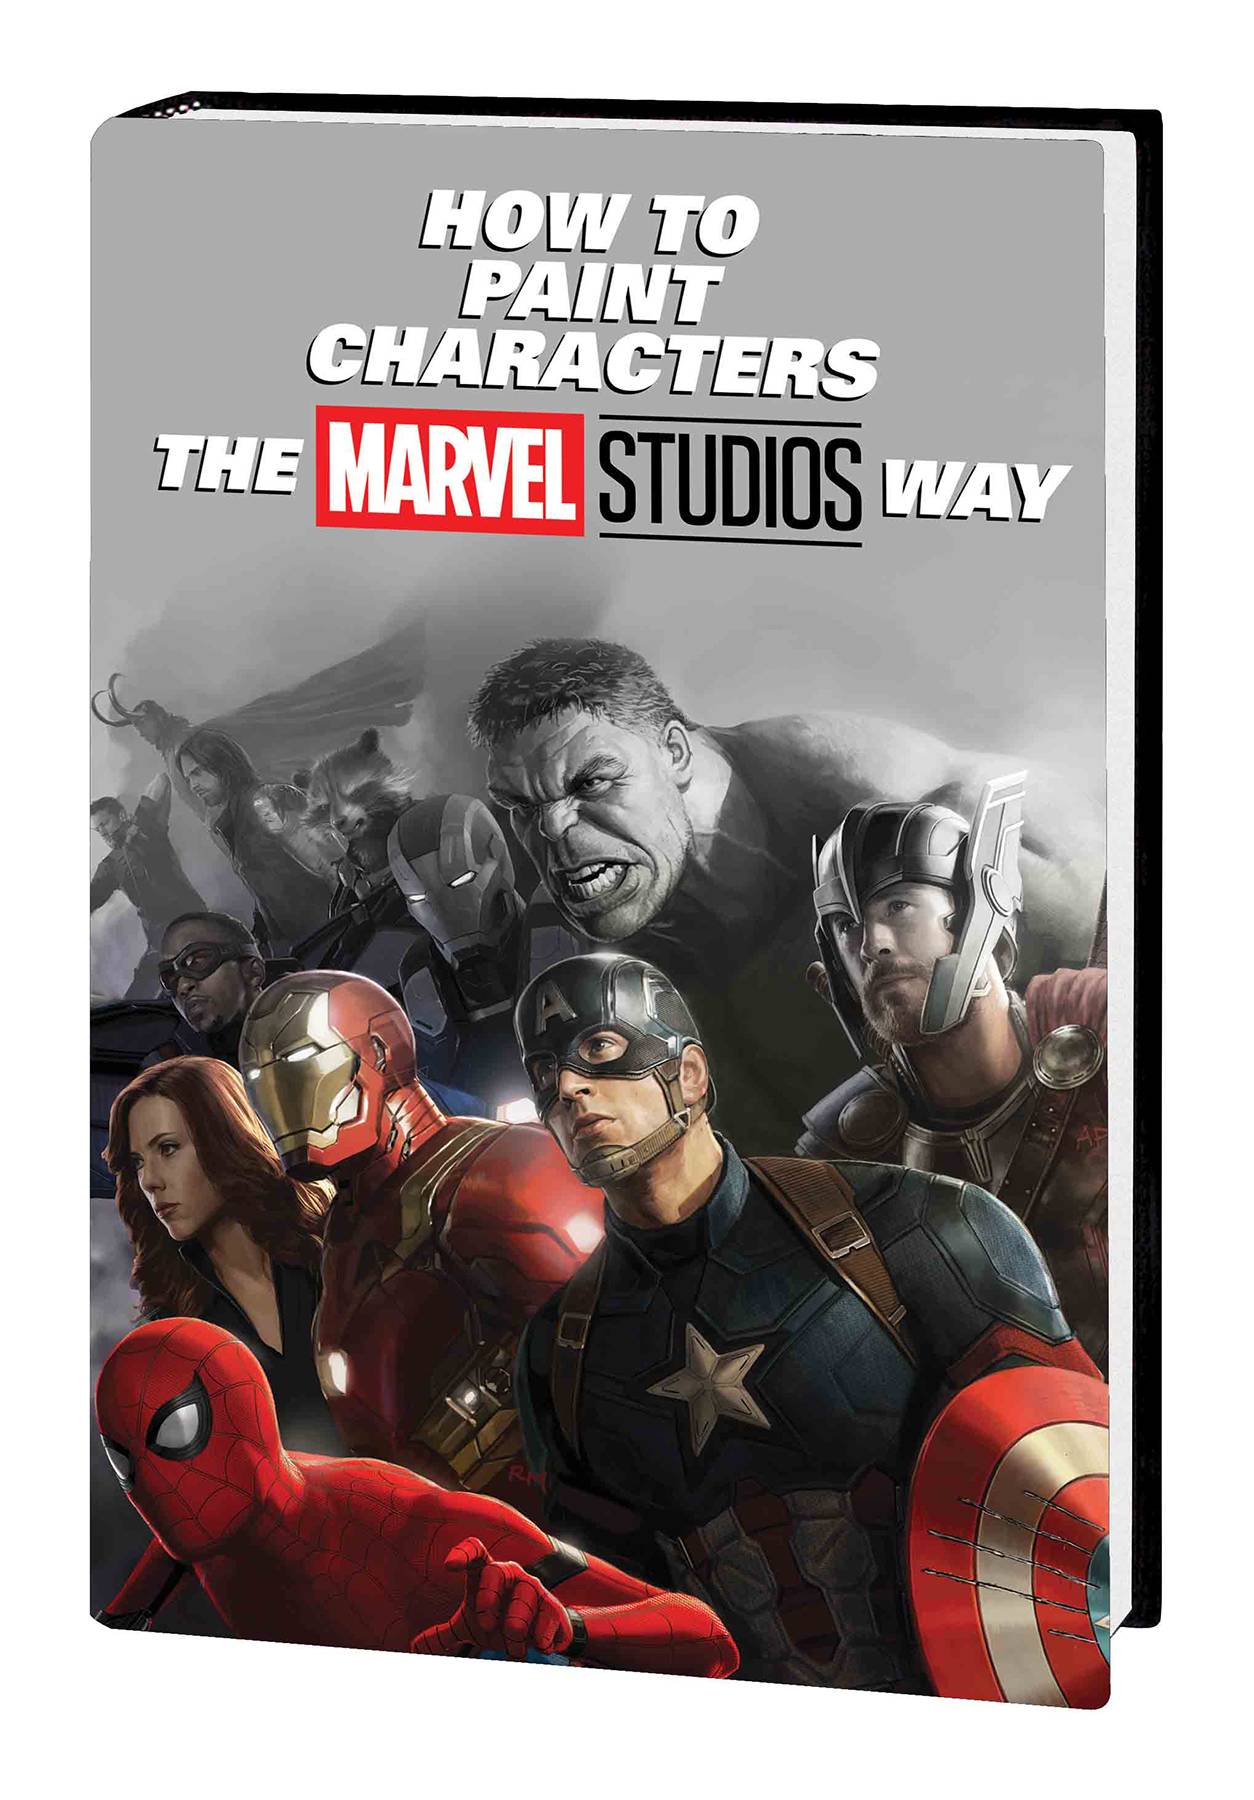 HOW TO PAINT CHARACTERS MARVEL STUDIOS WAY HC 10/16/19 FOC 04/15/19